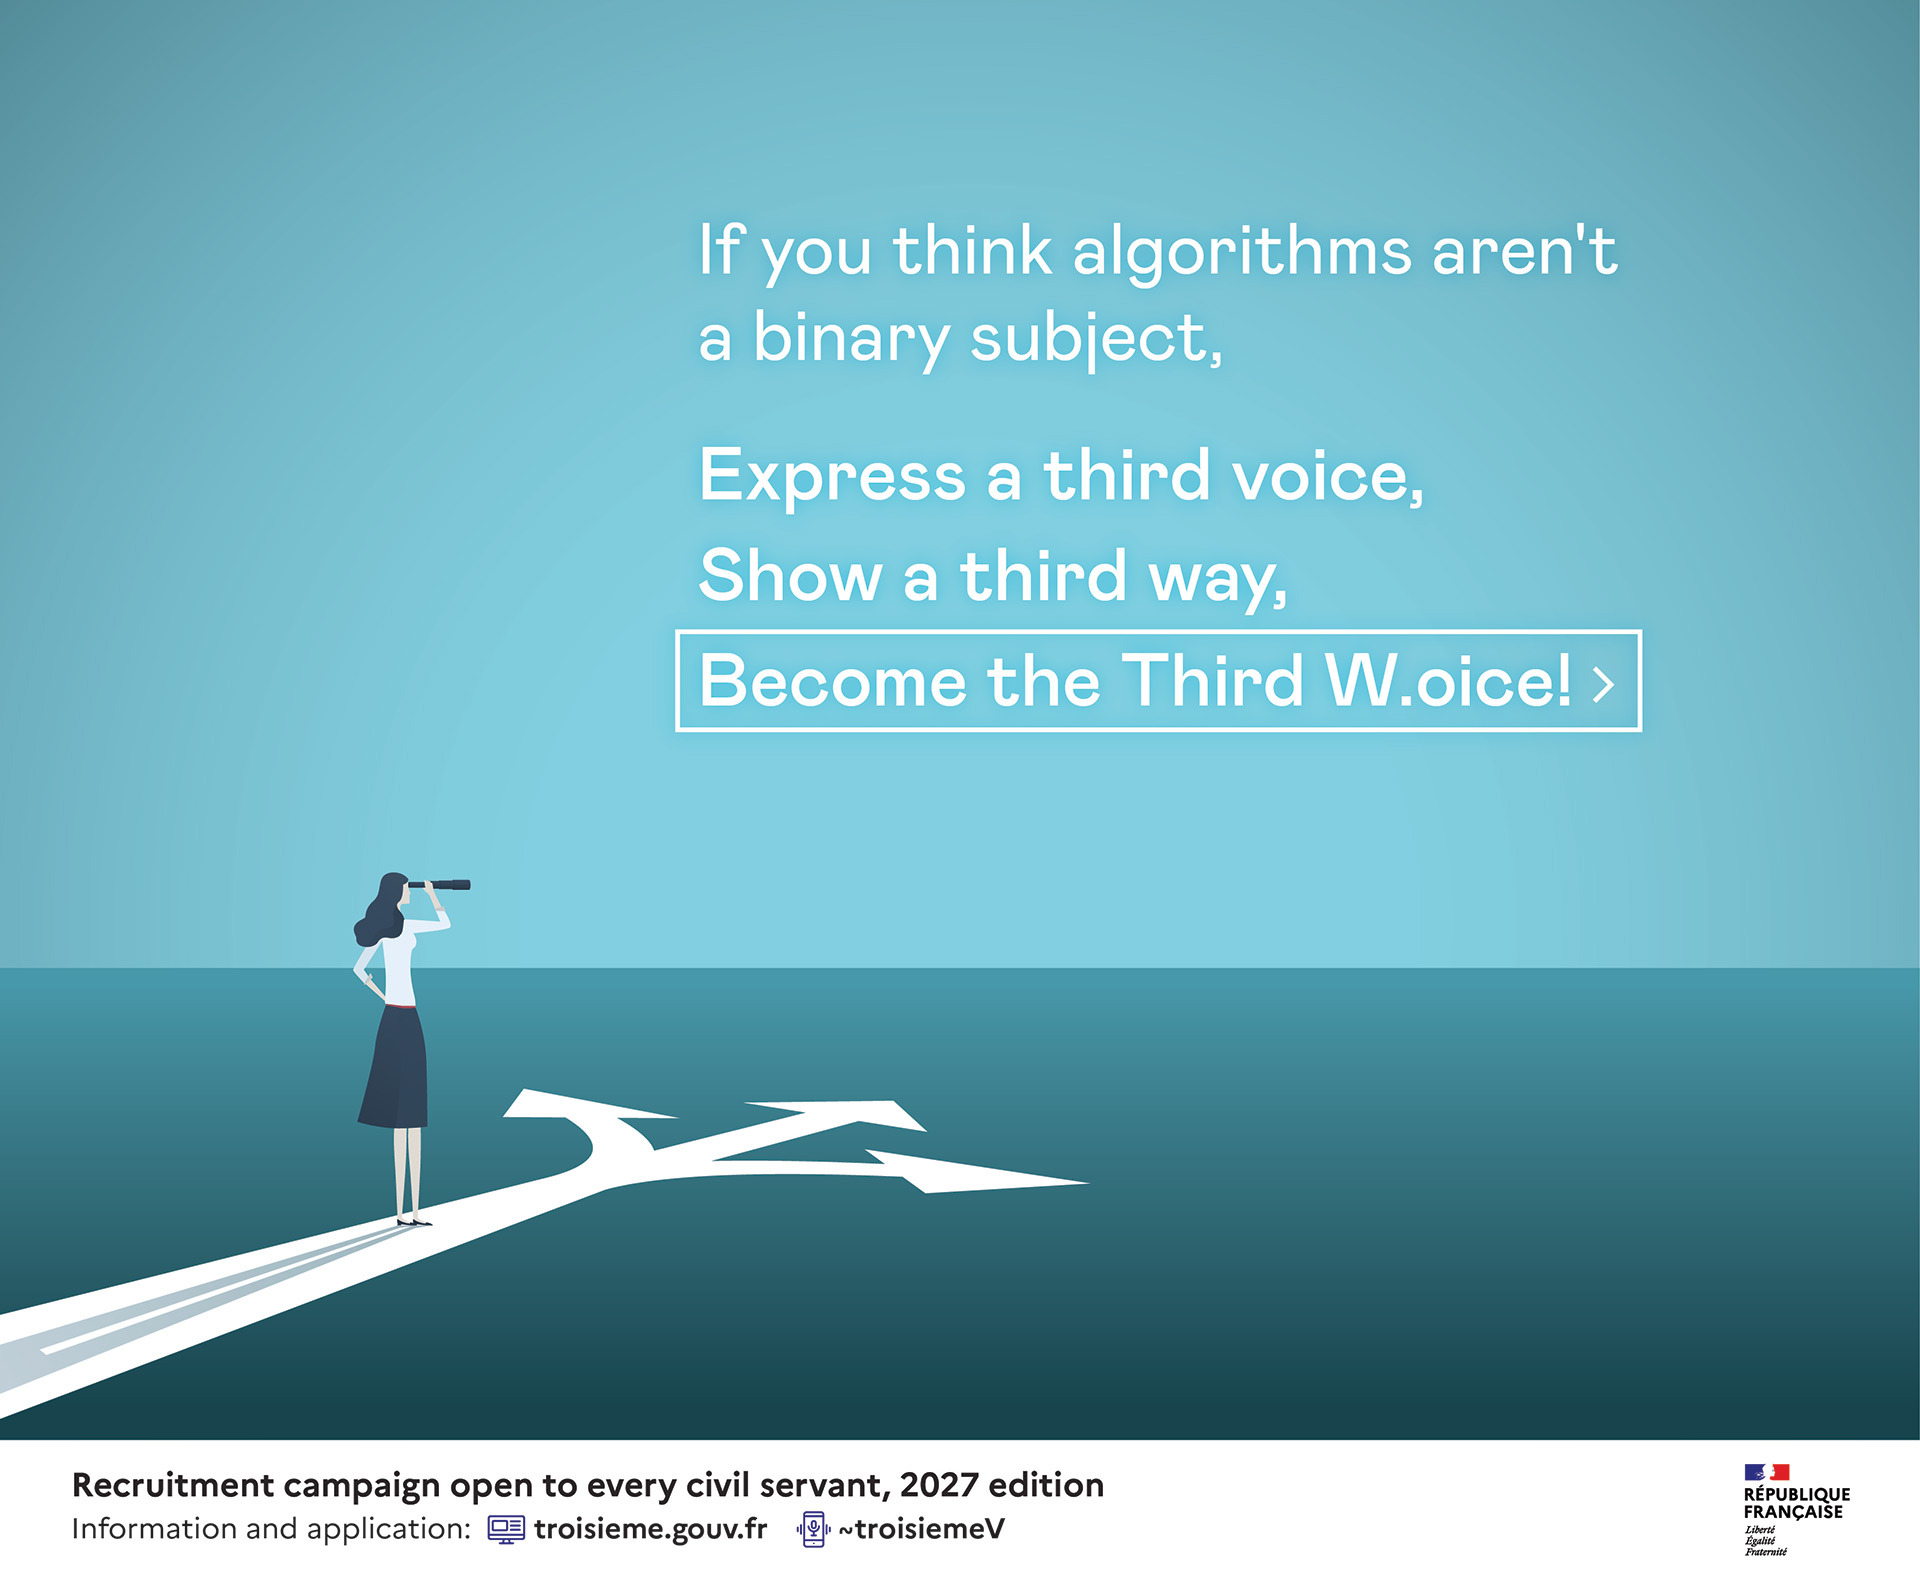 Ad for the Third Way/Voice recruitment campaign